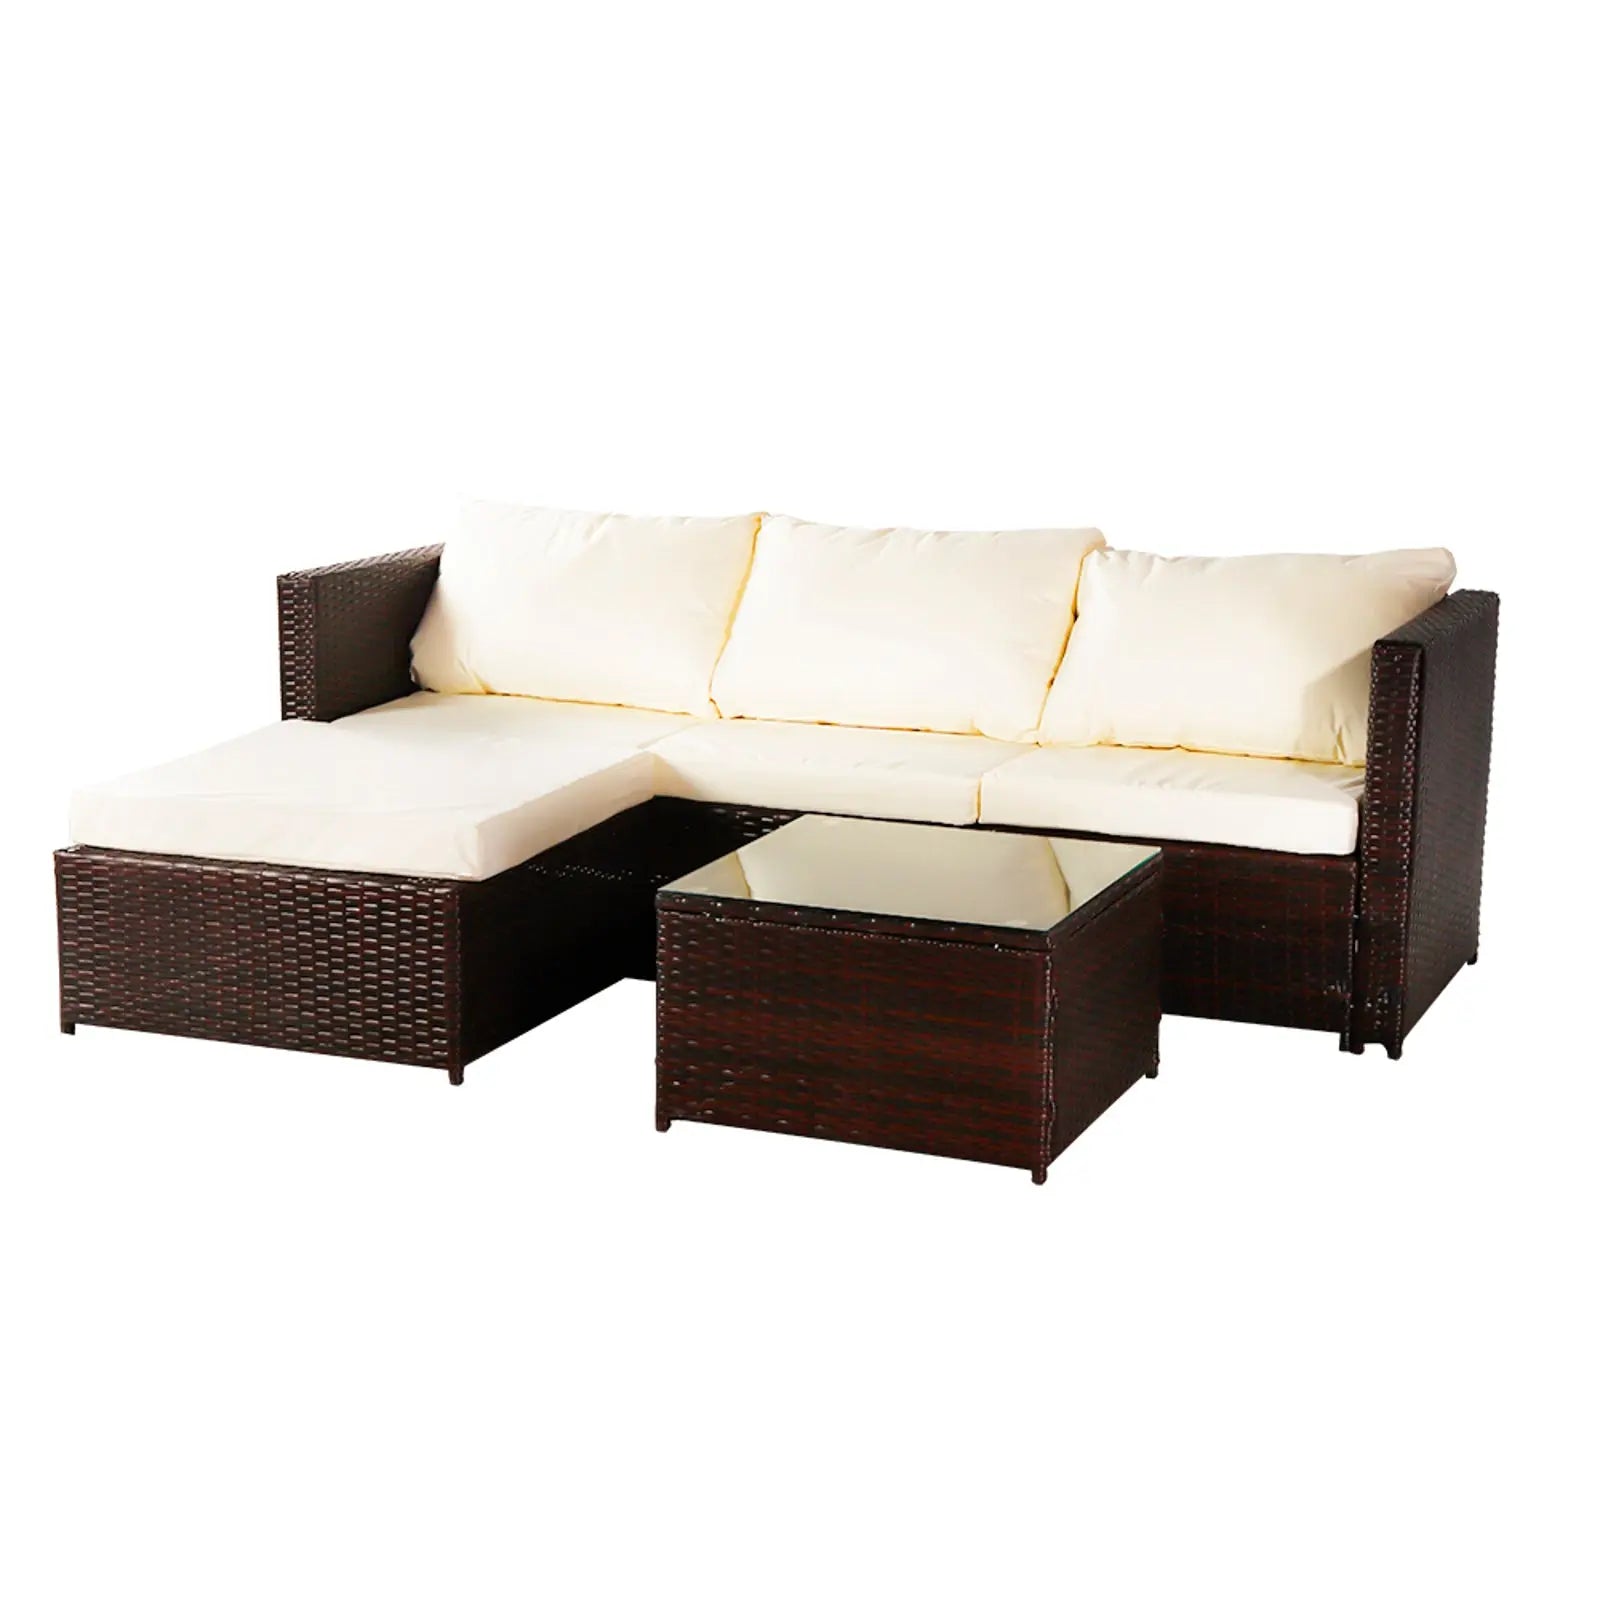 Three-piece Conjoined Sofa Pedal Coffee Table Brown (Combination of 2 Boxes) - Image #5